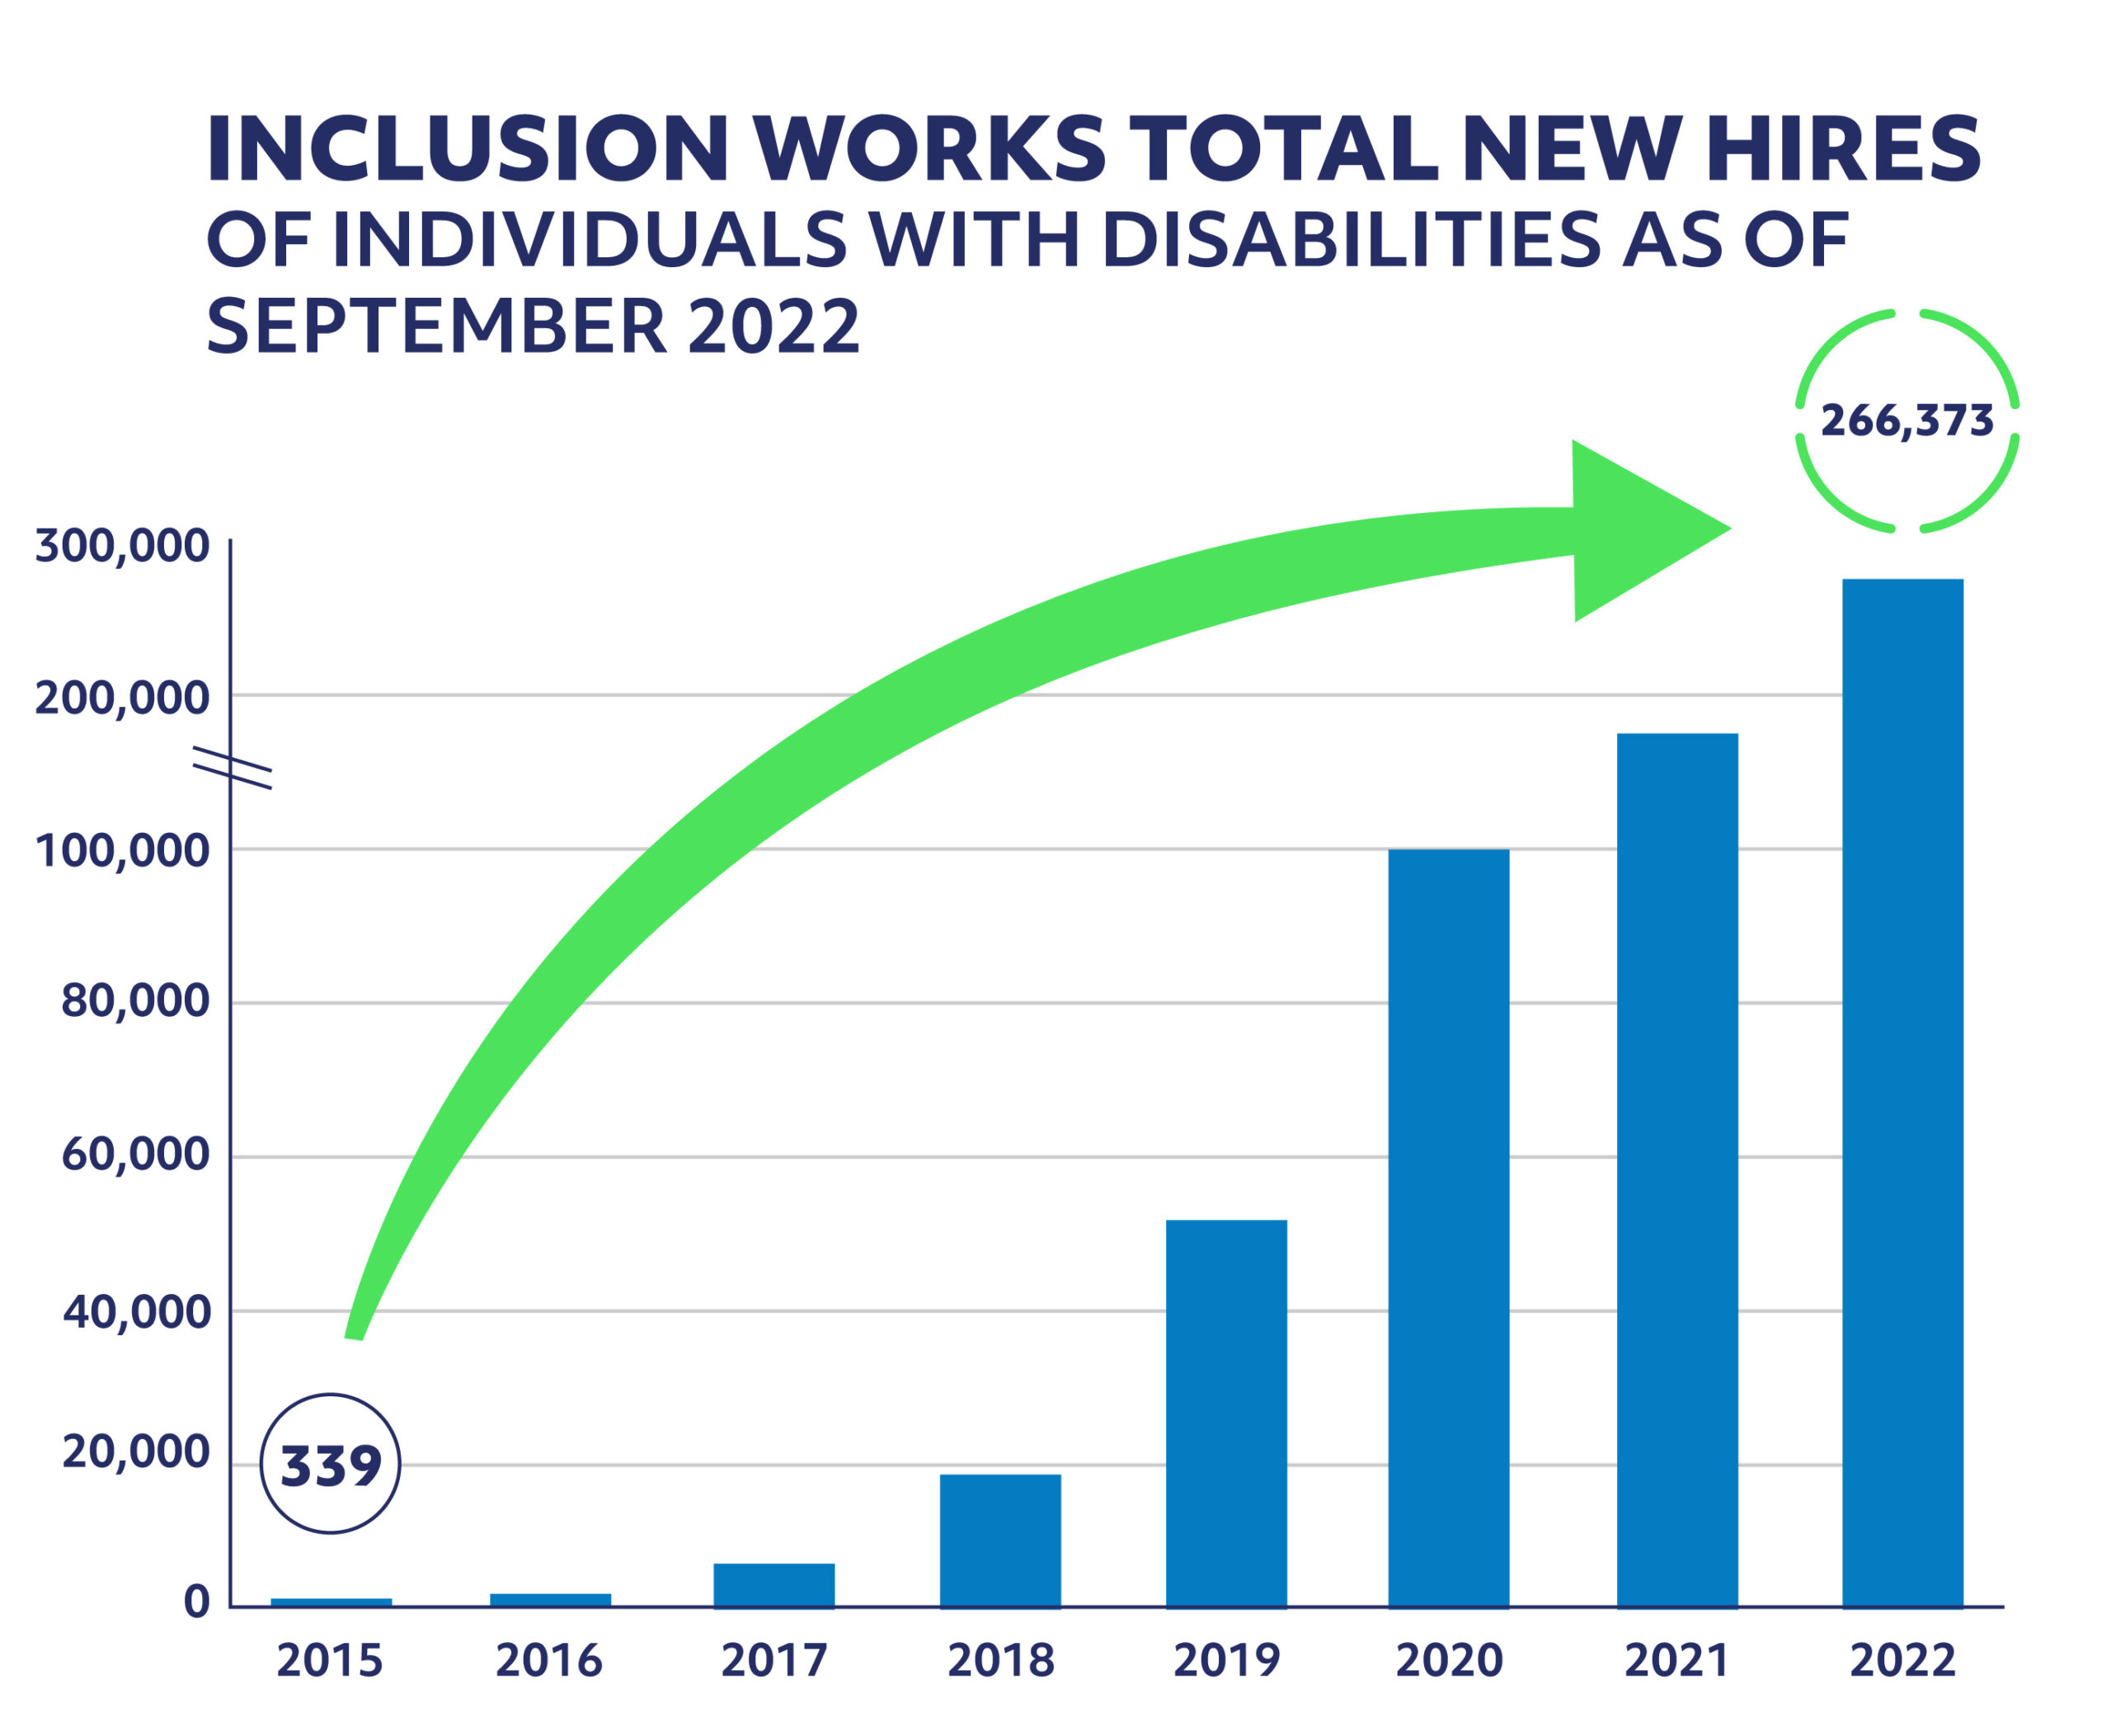 Line graph of Inclusion Works Total New Hires of Individuals with Disabilities as of September 2022, from 339 in 2015 to 266,373 in 2022.